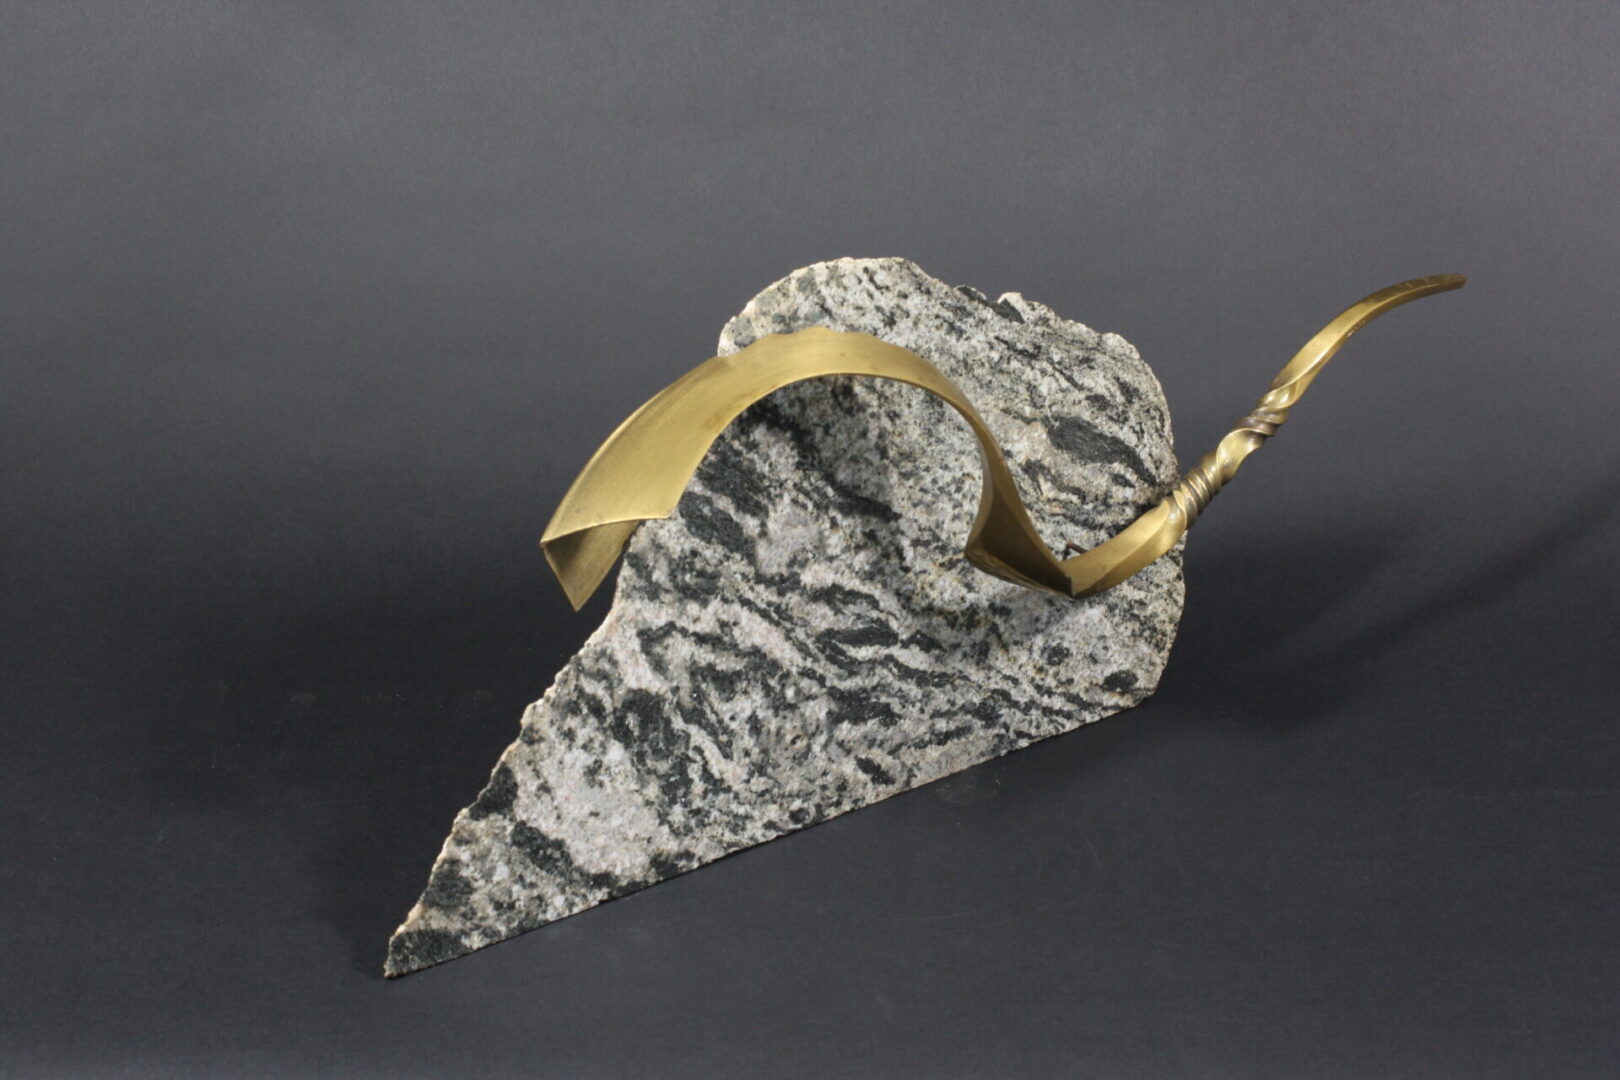 A marble sculpture adorned with gold leaf, inspired by Ira Sherman Jewelry.